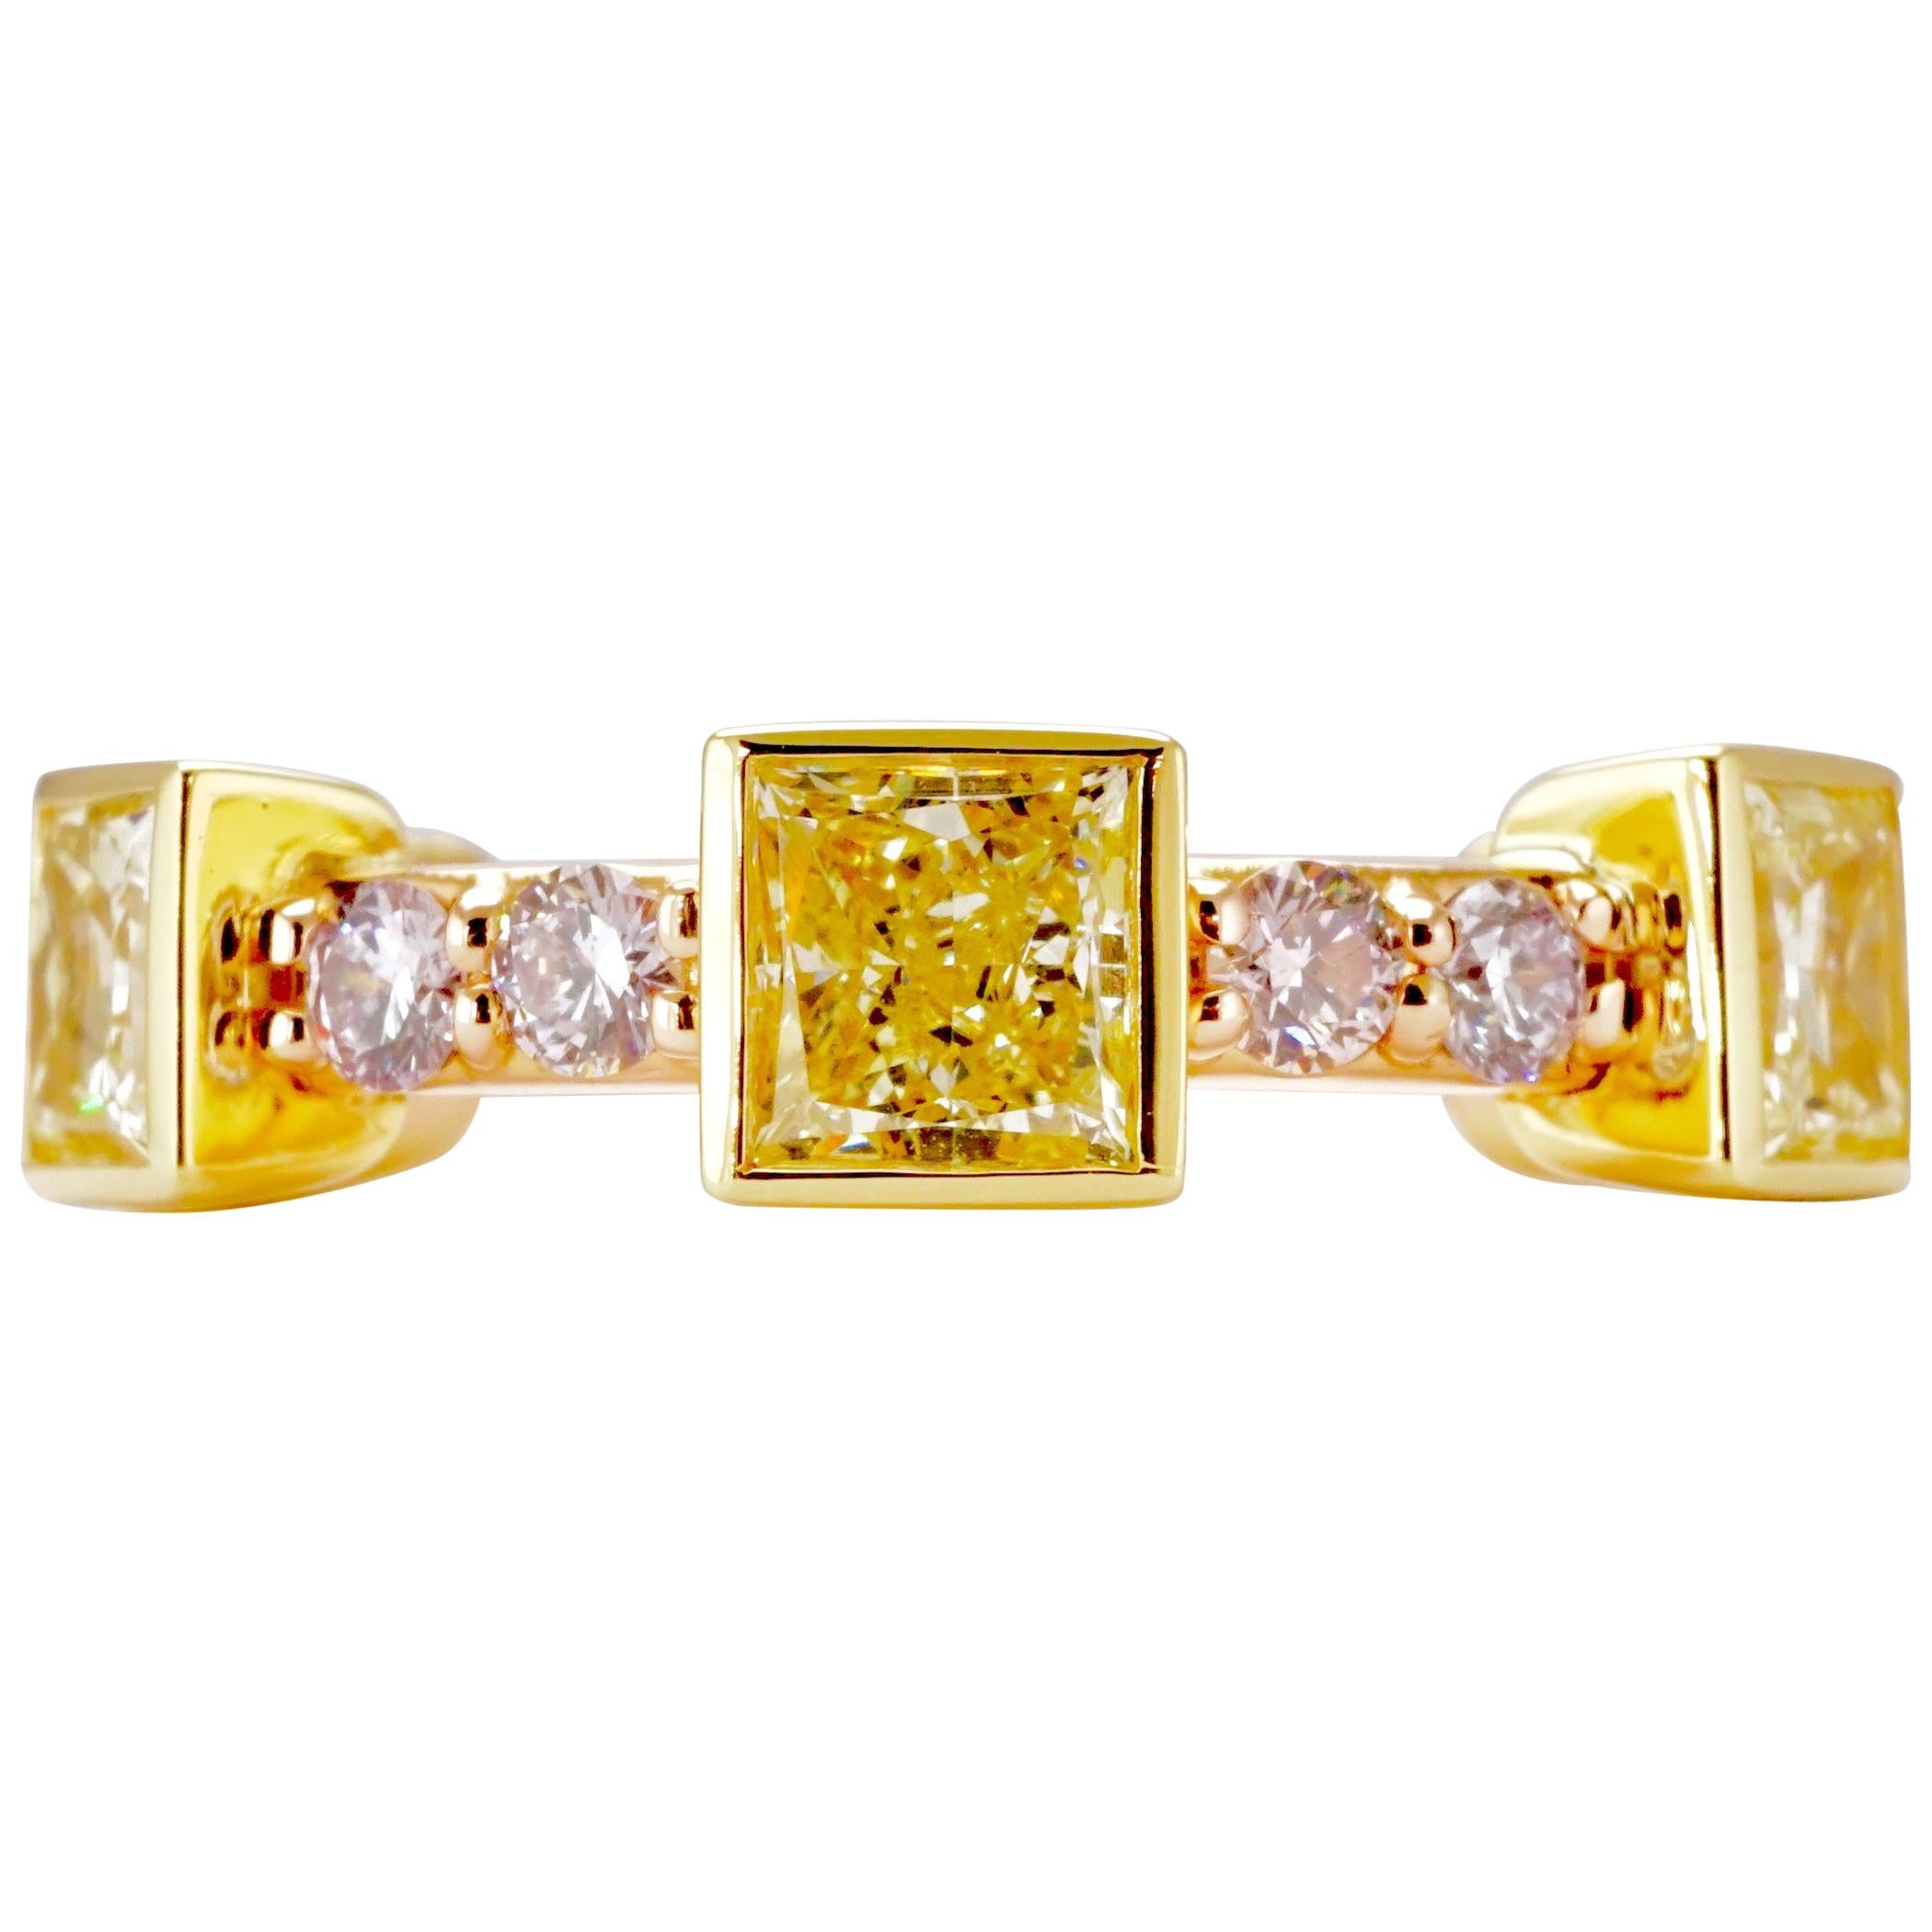 Alternating Natural Diamond Eternity band set in 18K Yellow gold and 18K Rose gold. Bezel set 6 Radiant Fancy Yellow cut Diamonds. Clarity - VS2-SI1. Carat weight: 2.10ct. 
12 Pave set Light Pink Brilliant Round diamonds. Clarity VS2-SI2. 
Carat